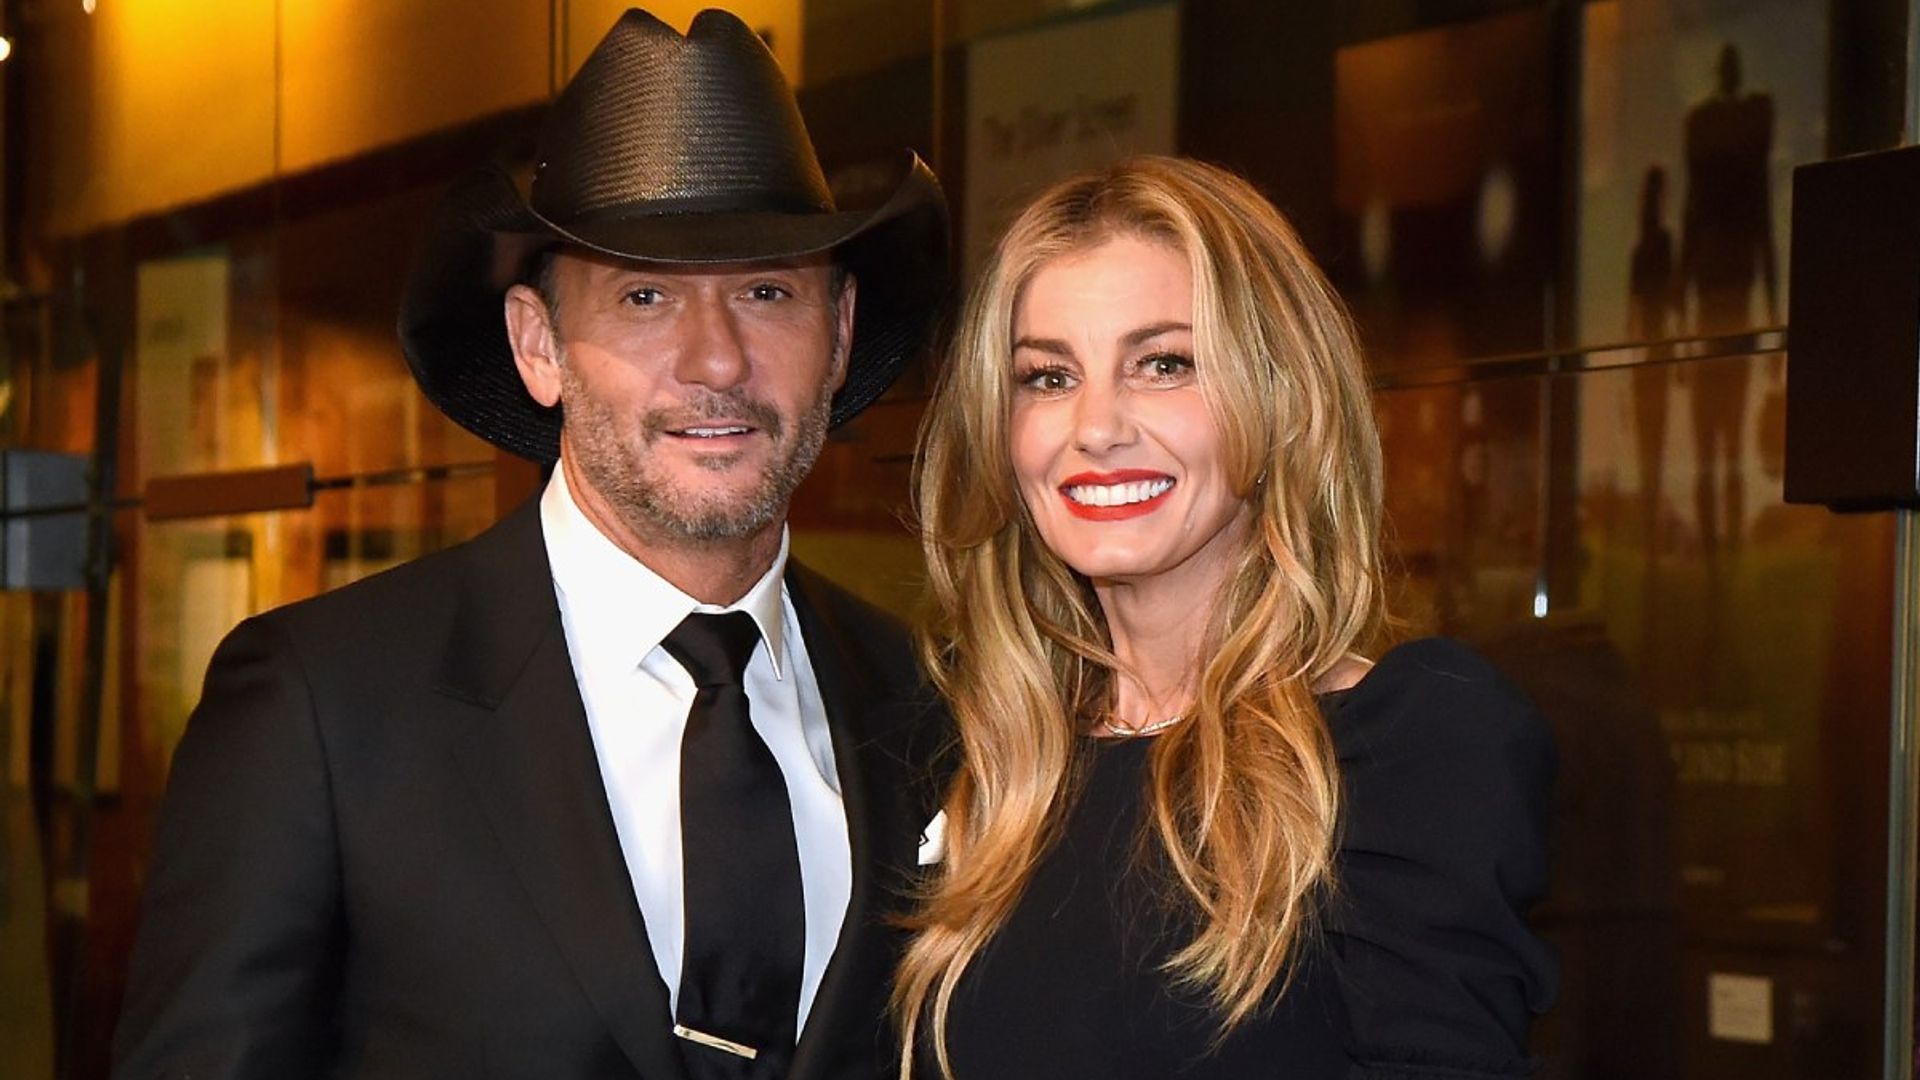 Faith Hill's daughter is a retro bikini bombshell in sizzling rooftop photos